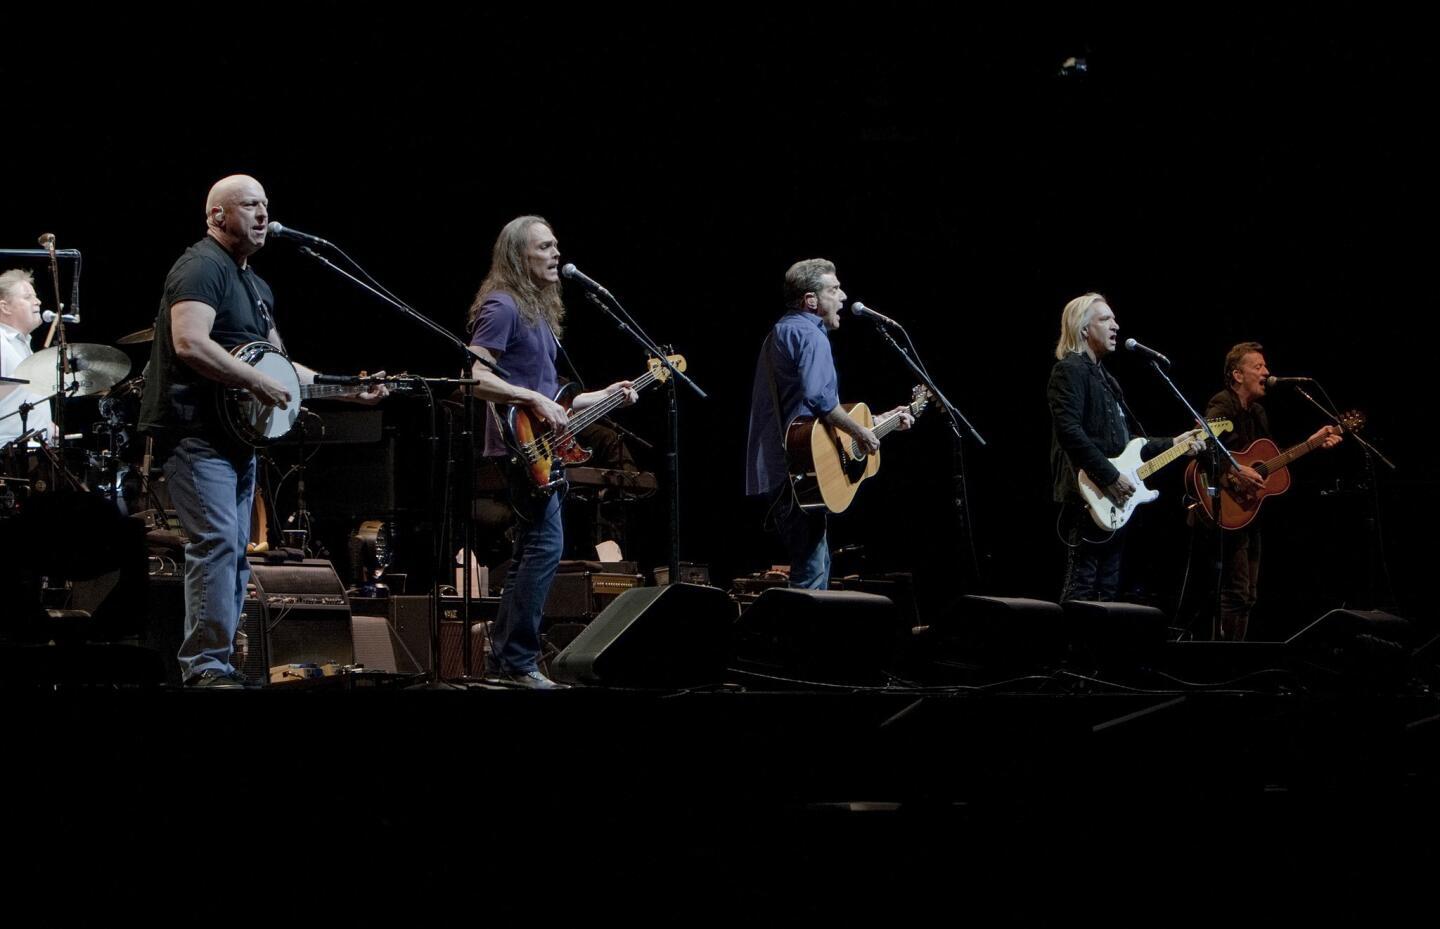 The Eagles are the first act to play the newly renovated Forum in Inglewood. The 46-year-old venue, which famously hosted many classic rock bands in addition to Lakers and Kings games, has undergone extensive changes to remake it from a sports arena into a live entertainment destination, thanks to a $100-million investment by Madison Square Garden Co. The Eagles perform at the newly renovated Forum on January 15, 2014 in Inglewood, California.